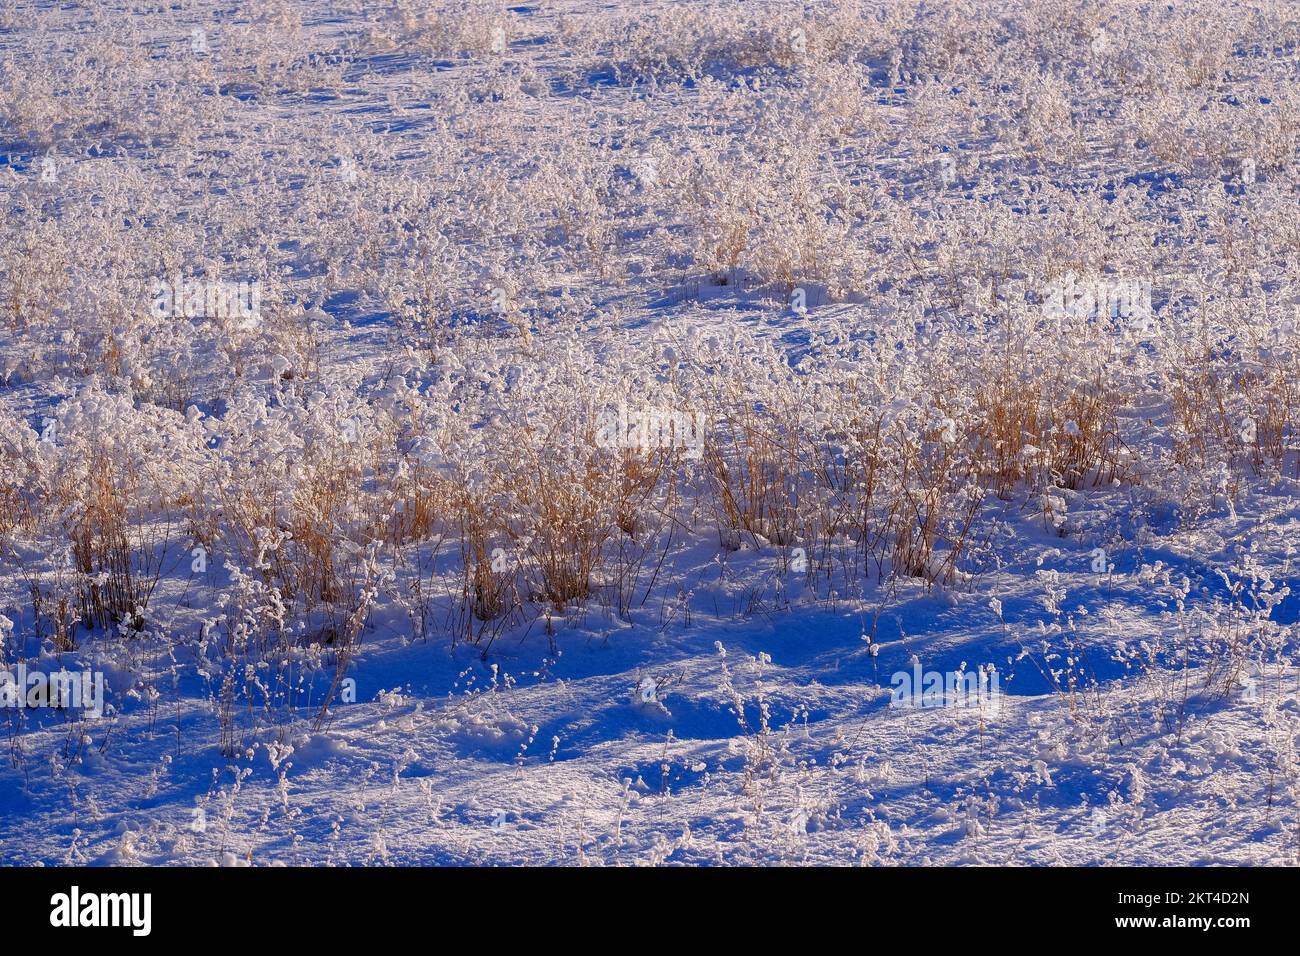 Snowy field in wintertime with snow and frosty ice covering plants Stock Photo